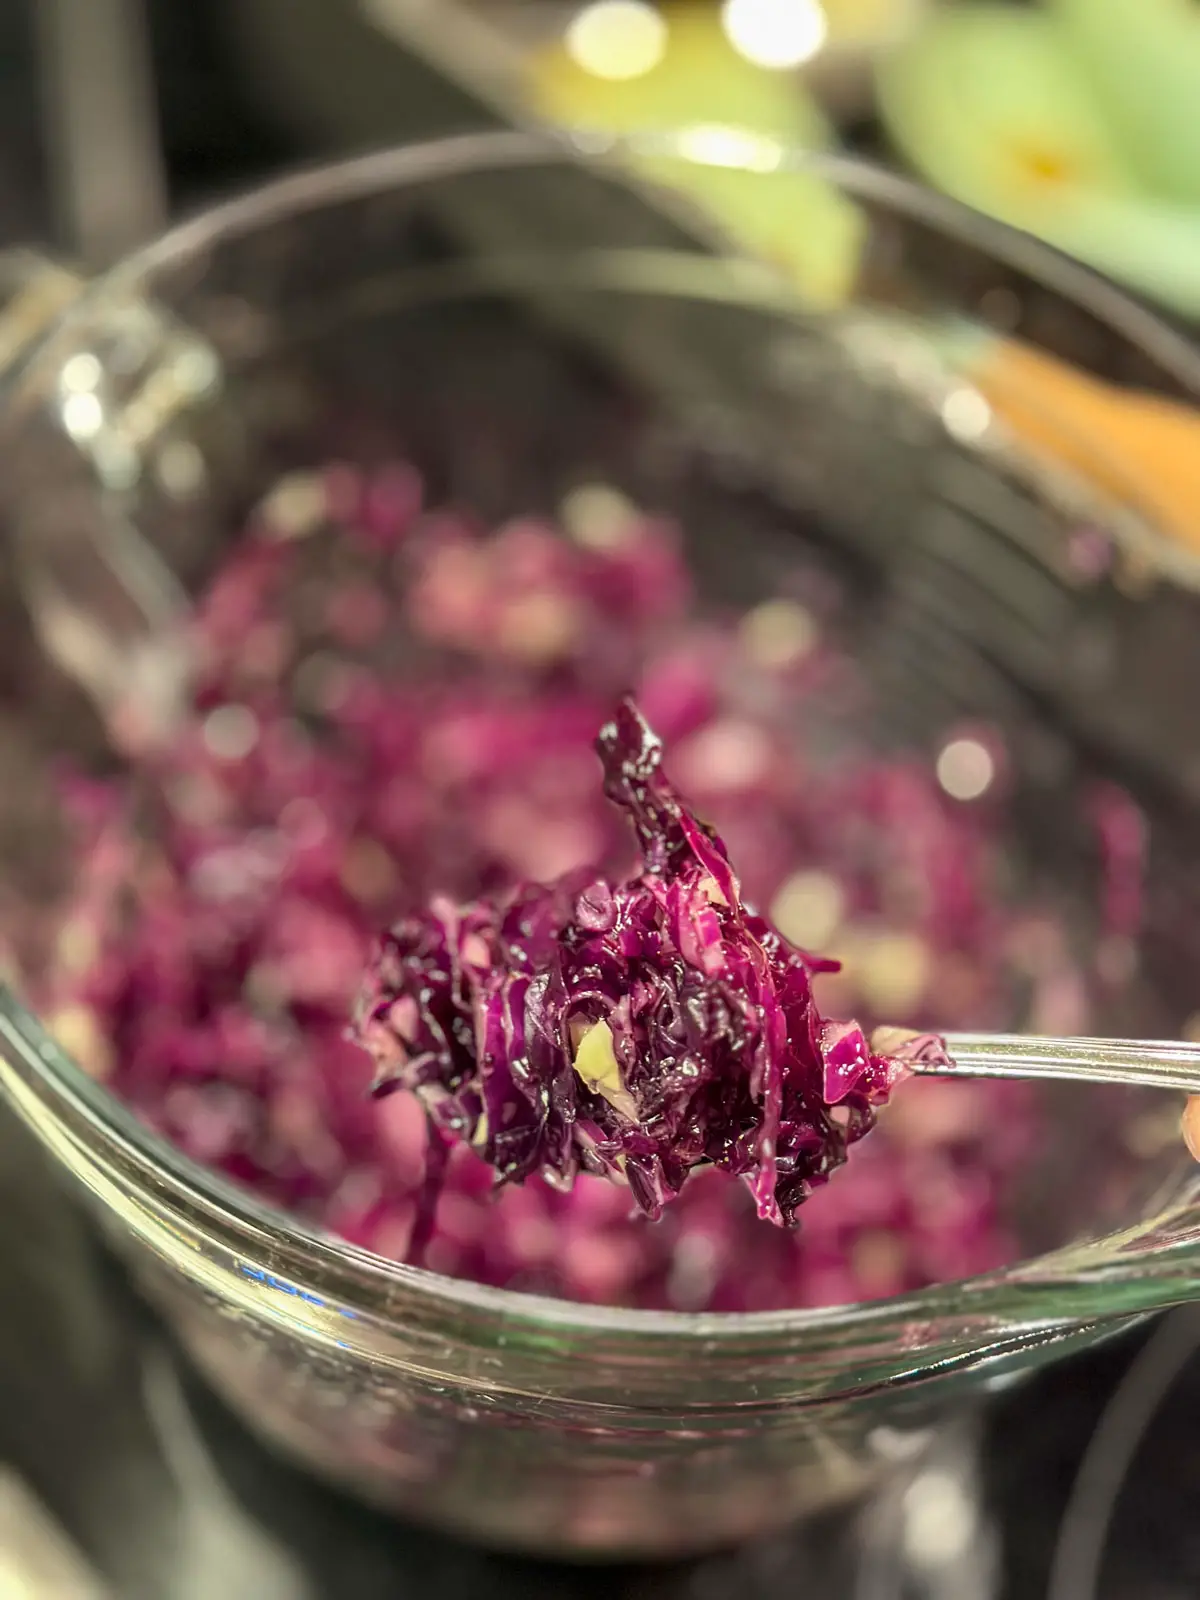 Middle Eastern Style Cabbage Salad with shredded red cabbage in a glass bowl. There is a spoon with the red cabbage in the foreground.